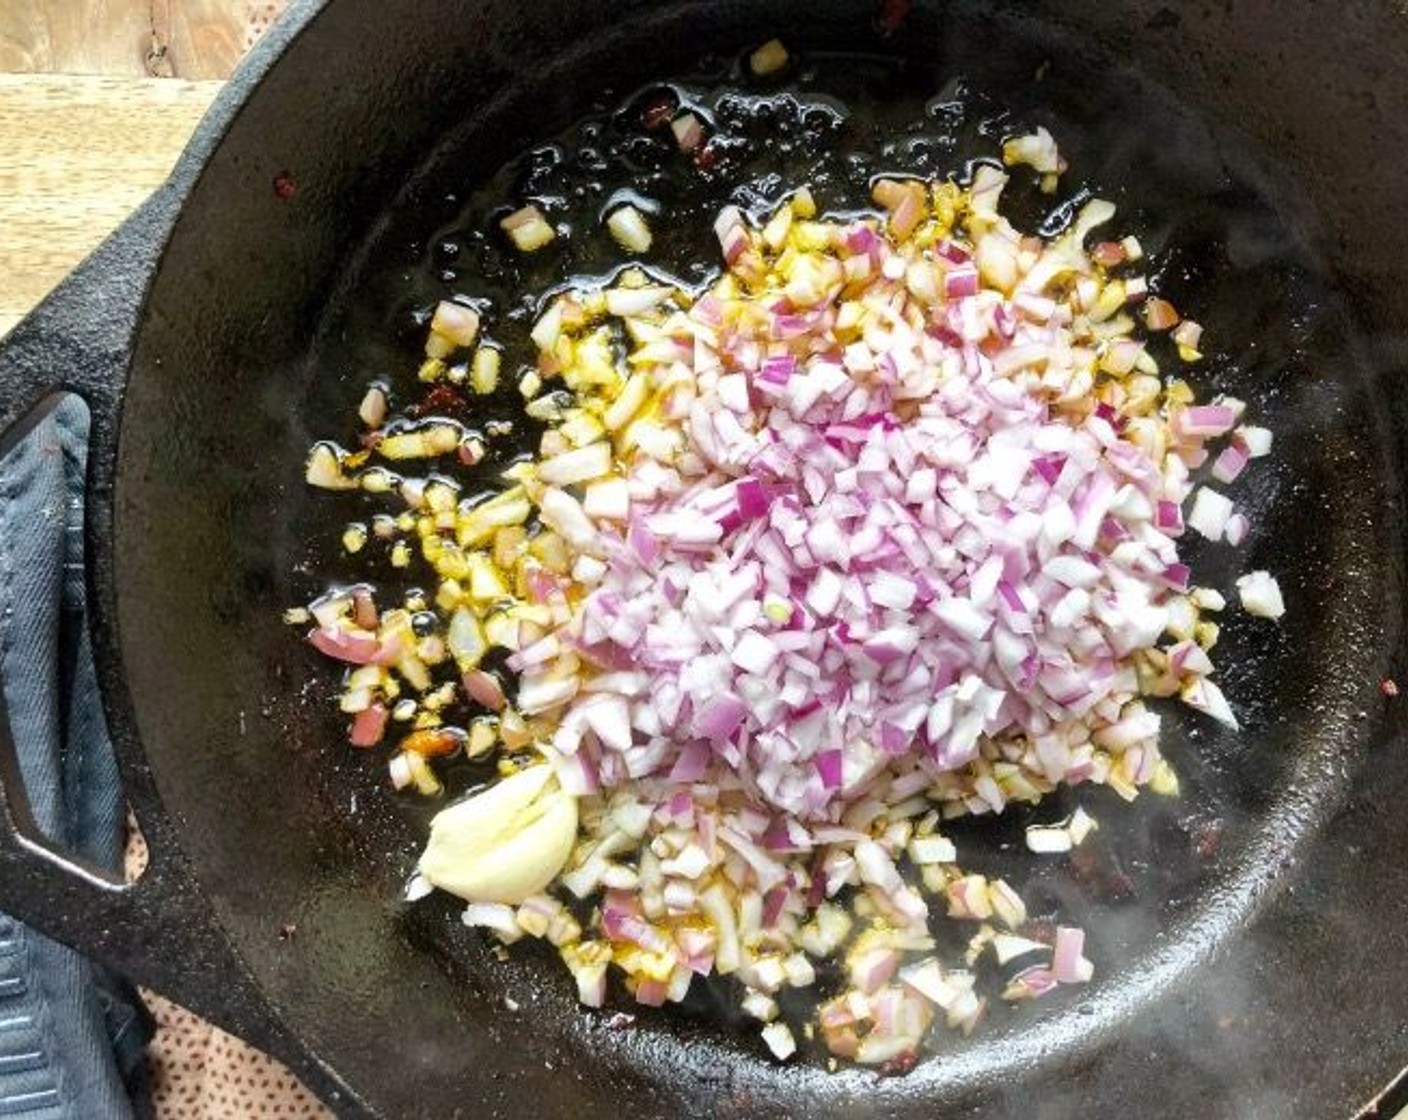 step 5 In that same skillet, heat Extra-Virgin Olive Oil (2 Tbsp). Add the Red Onion (1), Garlic (1 clove), and Kosher Salt (1/2 tsp). Cook, stirring frequently, over medium heat for about 5 minutes until the onion is soft and translucent.